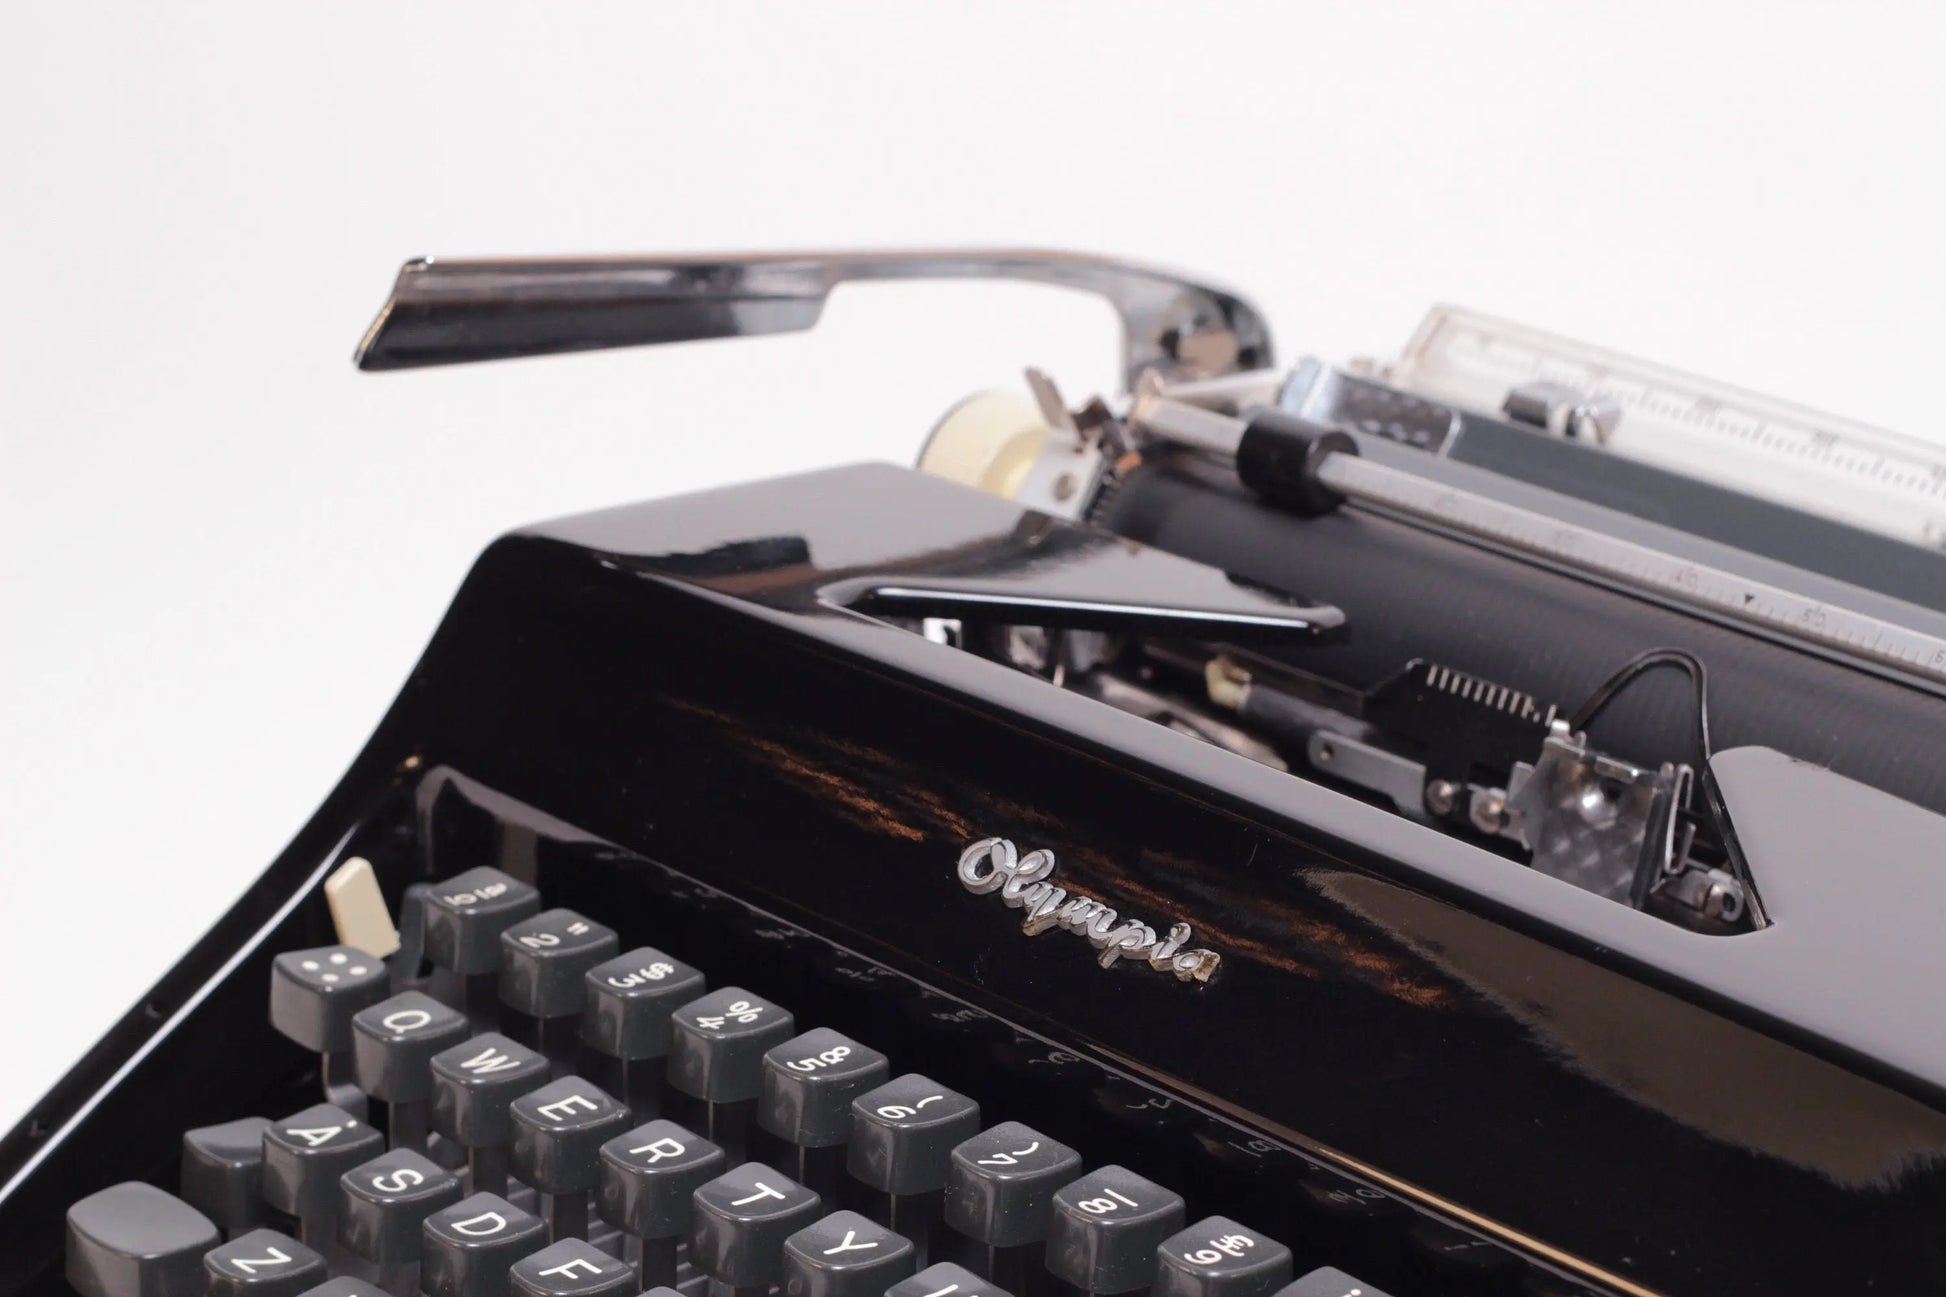 Limited Edition Olympia SM Custom Black Typewriter, Vintage, Mint Condition, Manual Portable, Professionally Serviced by Typewriter.Company - ElGranero Typewriter.Company